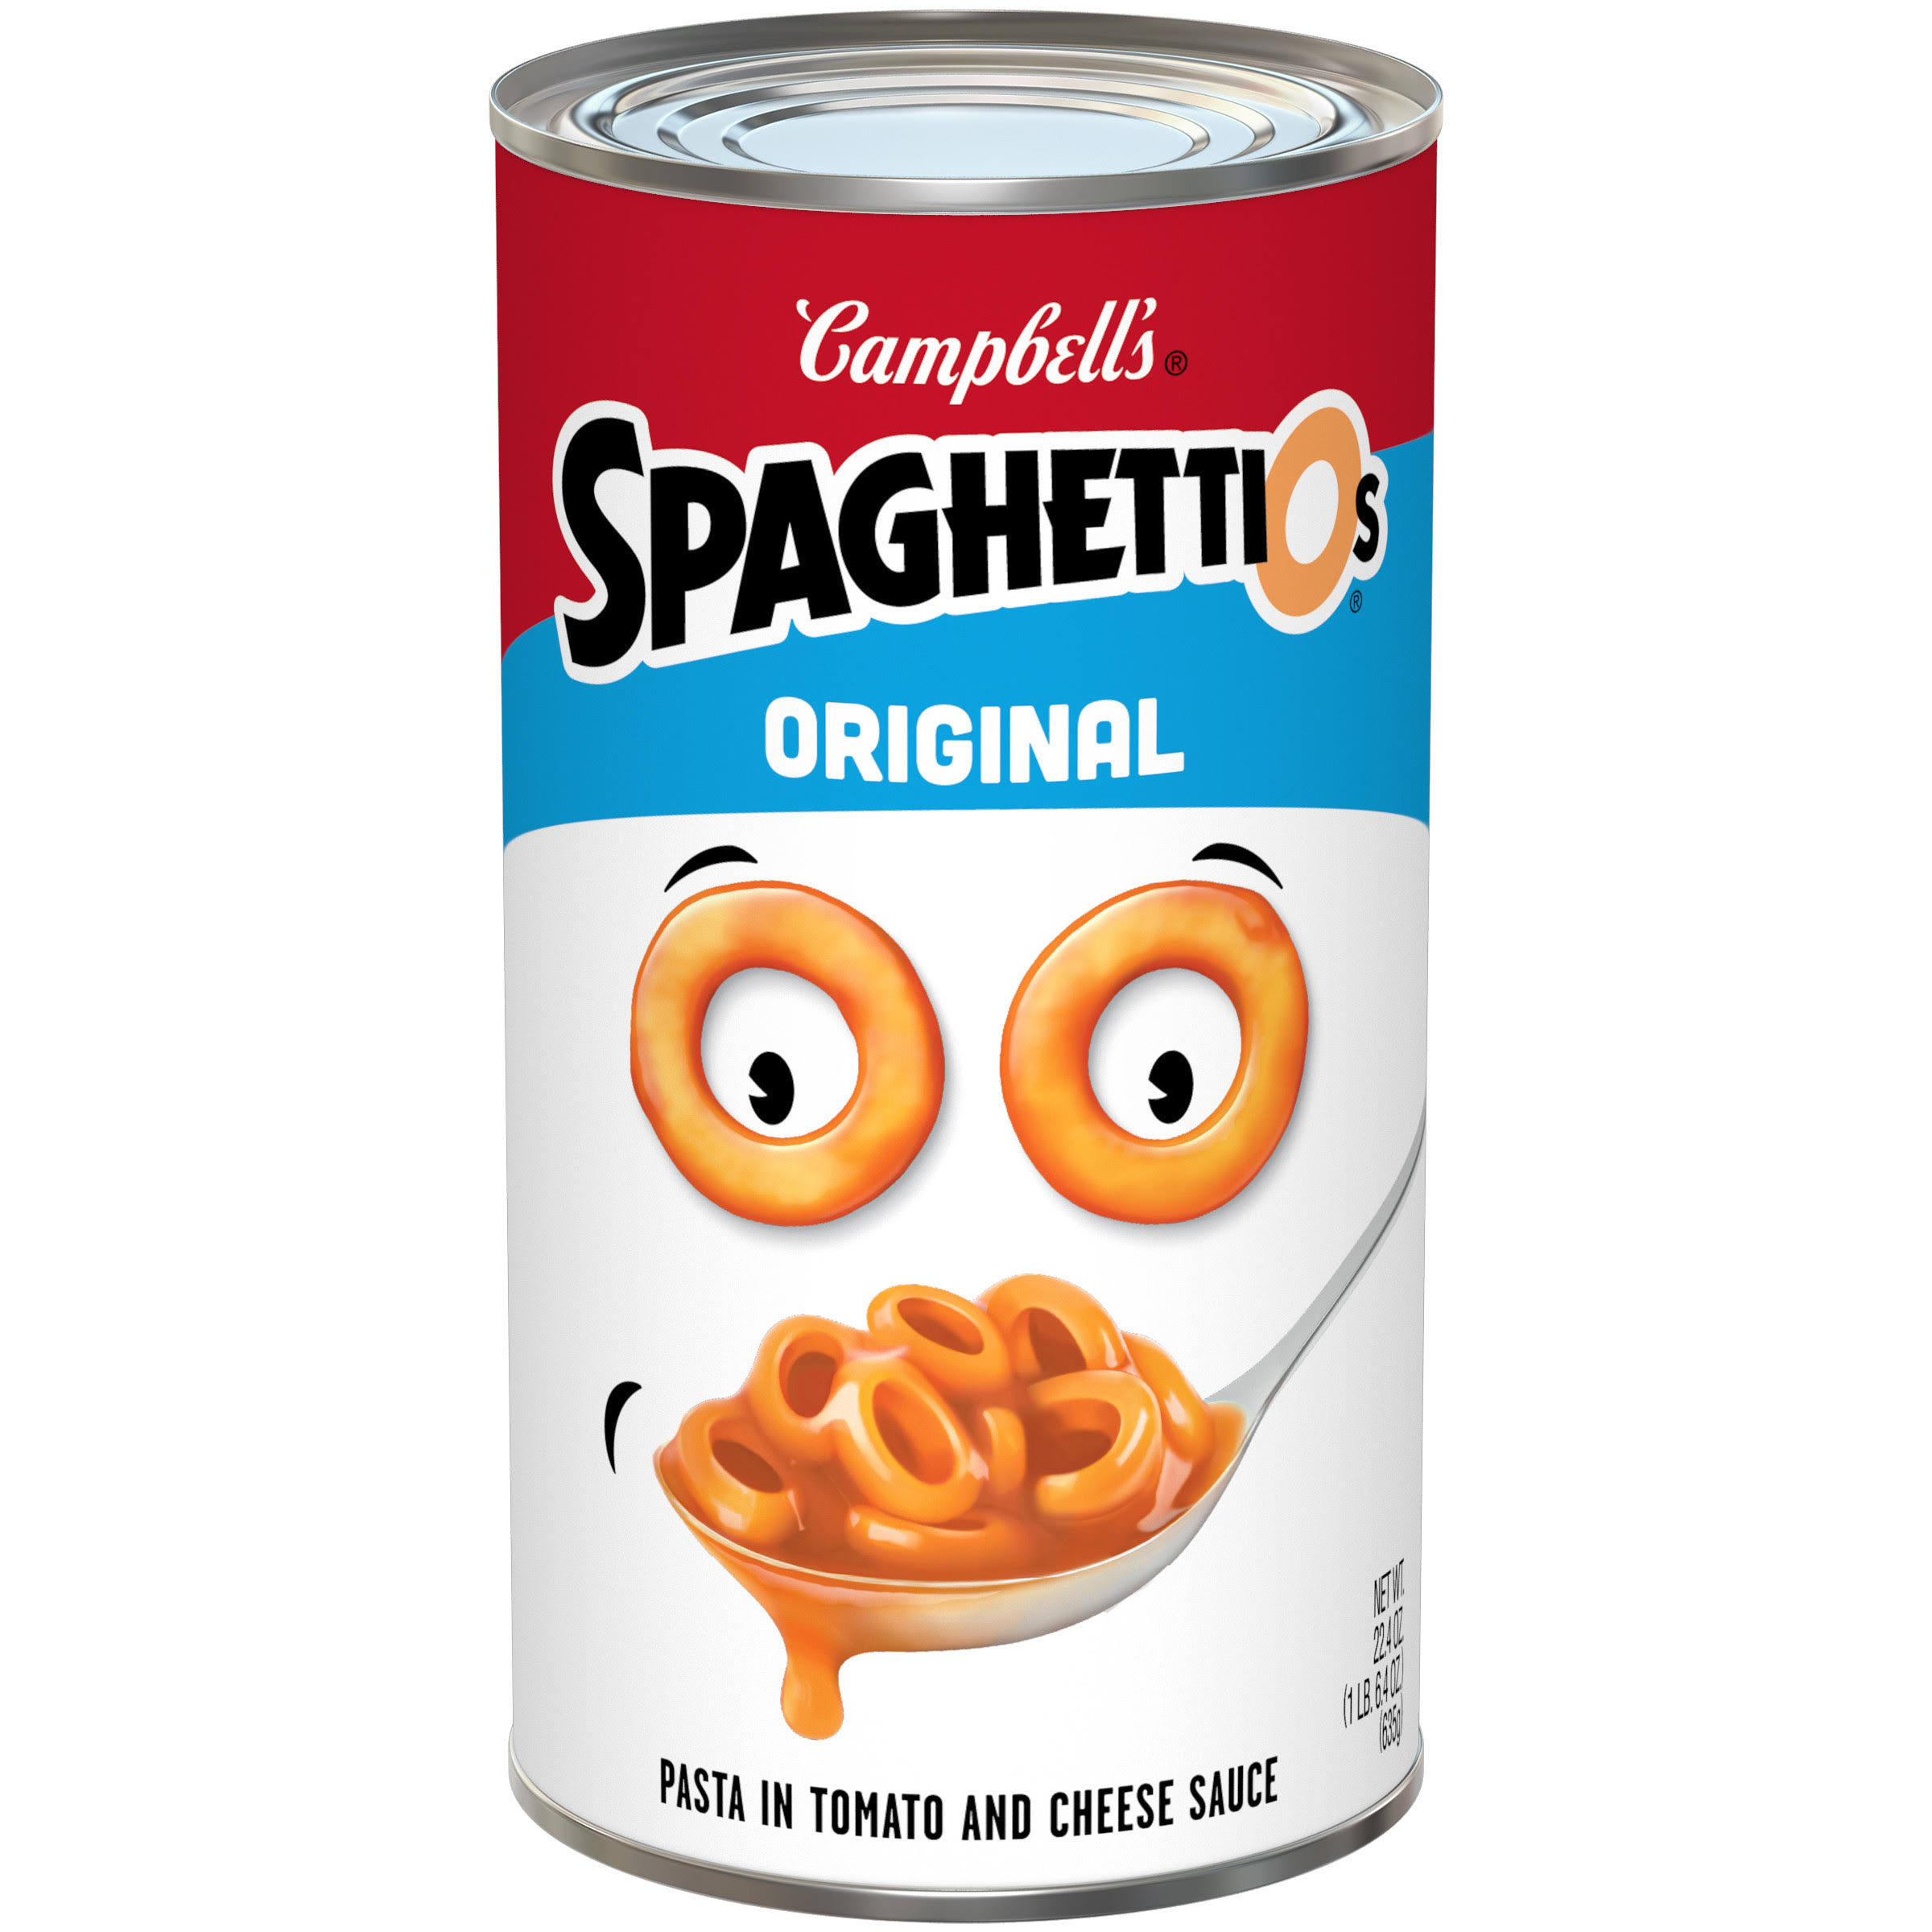 Campbell's Original SpaghettiOs Pasta - in Tomato and Cheese Sauce, 22.4oz